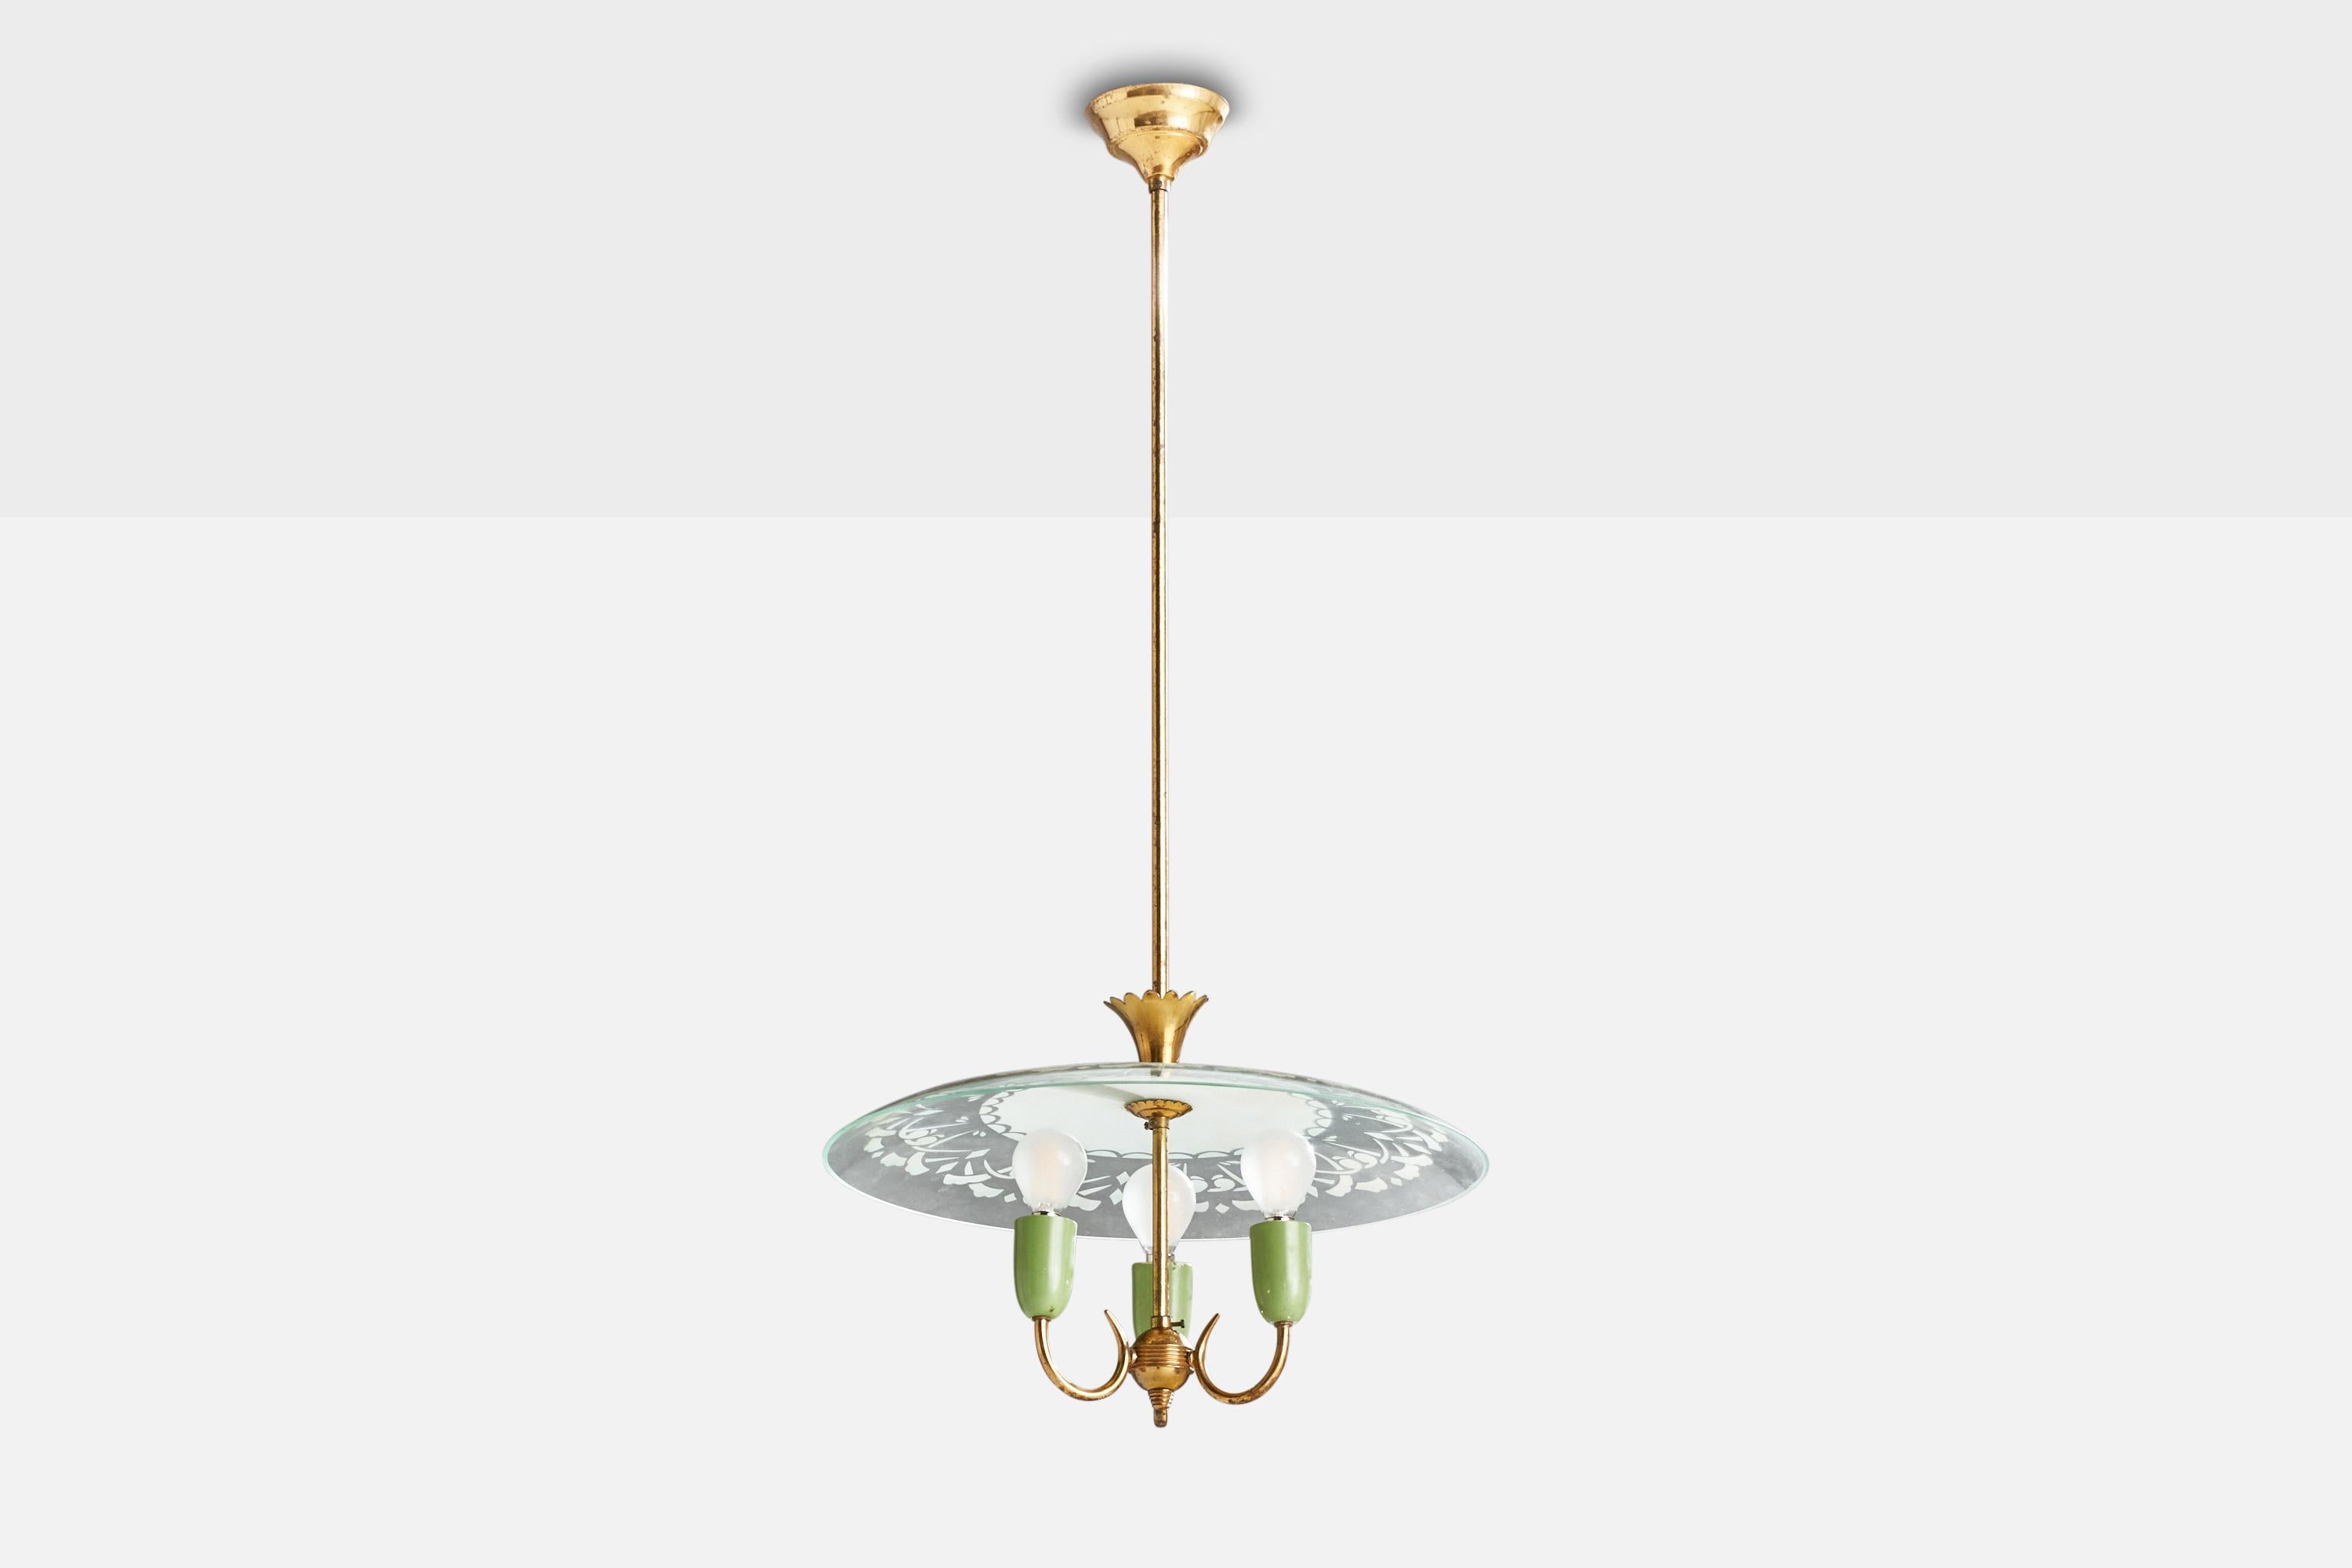 A brass, green metal and etched glass chandelier designed and produced in Italy, 1940s.

Dimensions of canopy (inches): 2” H x 3.5” Diameter
Socket takes standard E-14 bulbs. 3 sockets.There is no maximum wattage stated on the fixture. All lighting